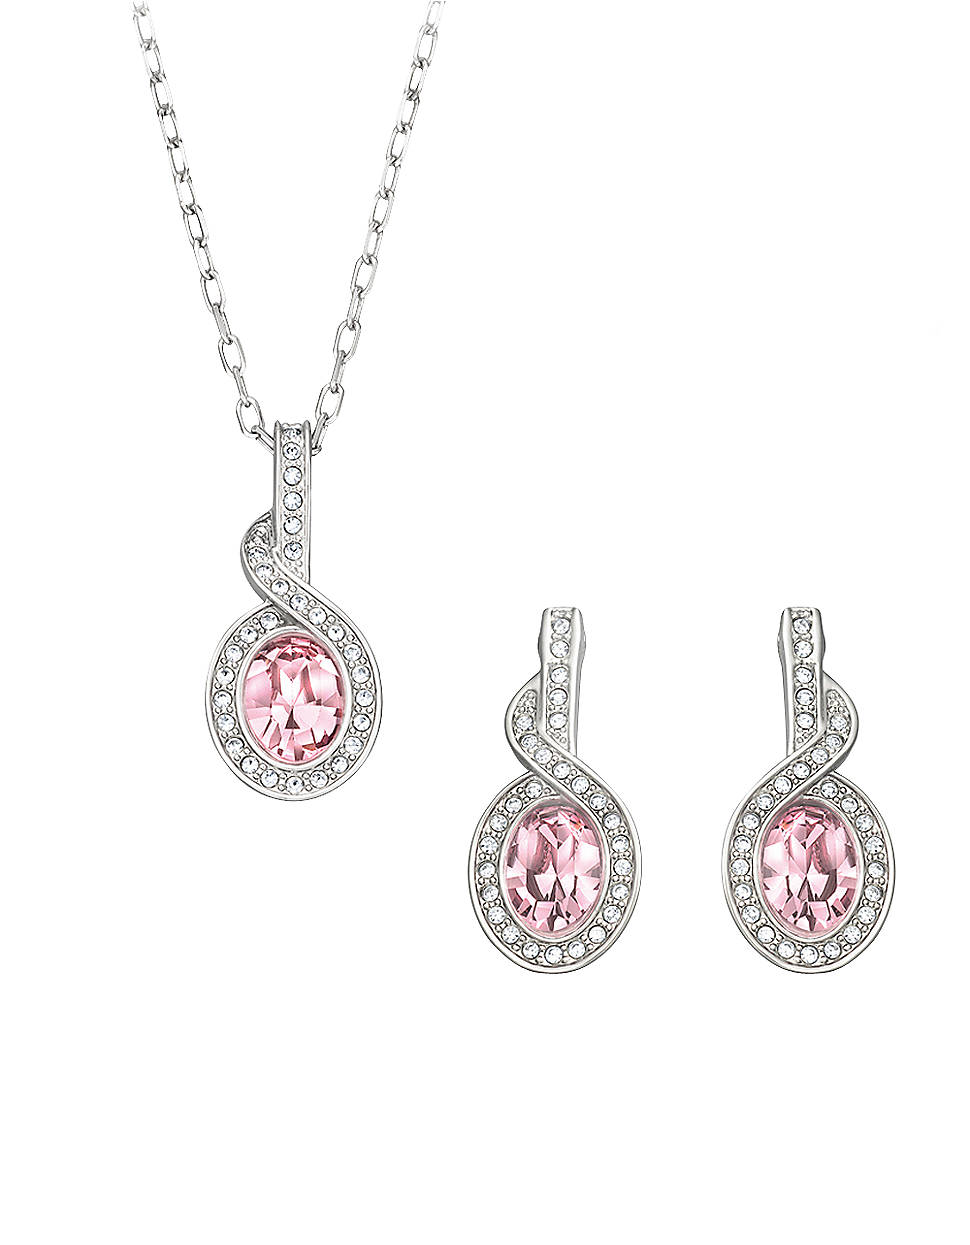 Swarovski Tyra Silver Tone Rose Crystal Necklace And Earrings Set in ...